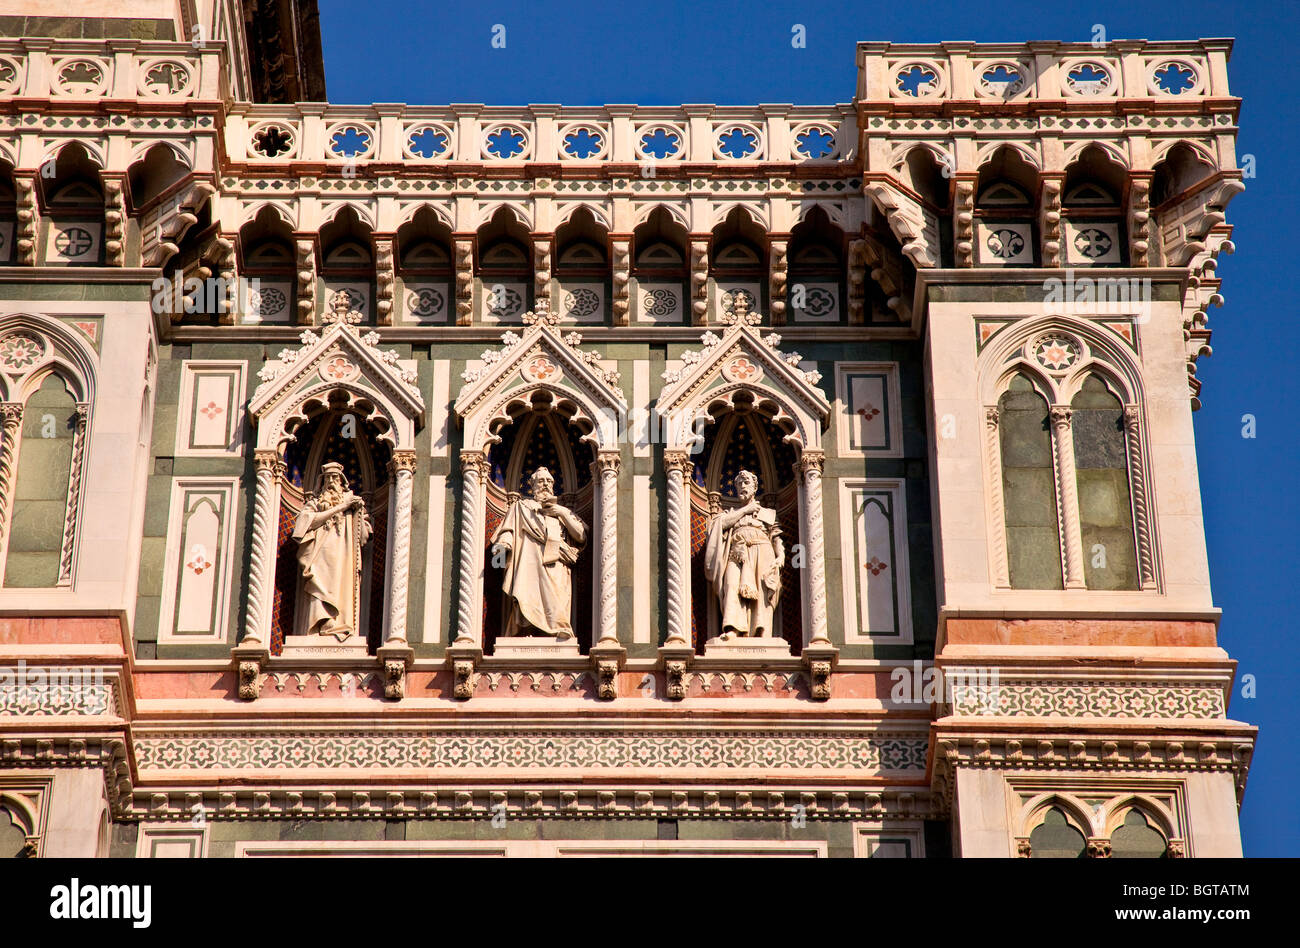 Sculptures and architectural details on the Duomo - Santa Maria del Fiore, in Florence Tuscany Italy Stock Photo